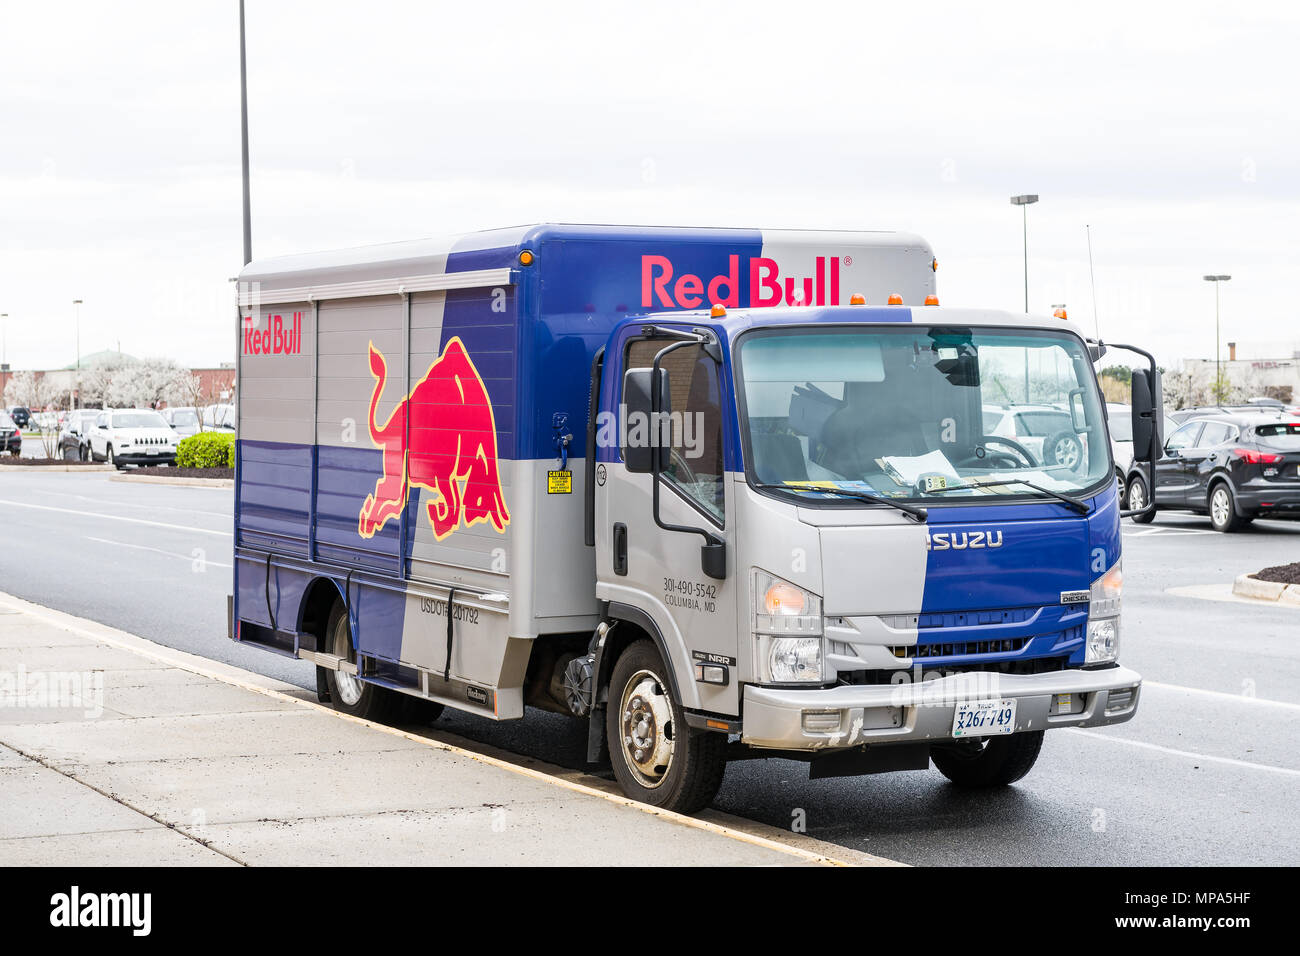 Sterling, USA - April 4, 2018: Red Bull car truck with blue red logo in Fairfax county, Virginia shopping mall closeup, Isuzu vehicle Stock Photo